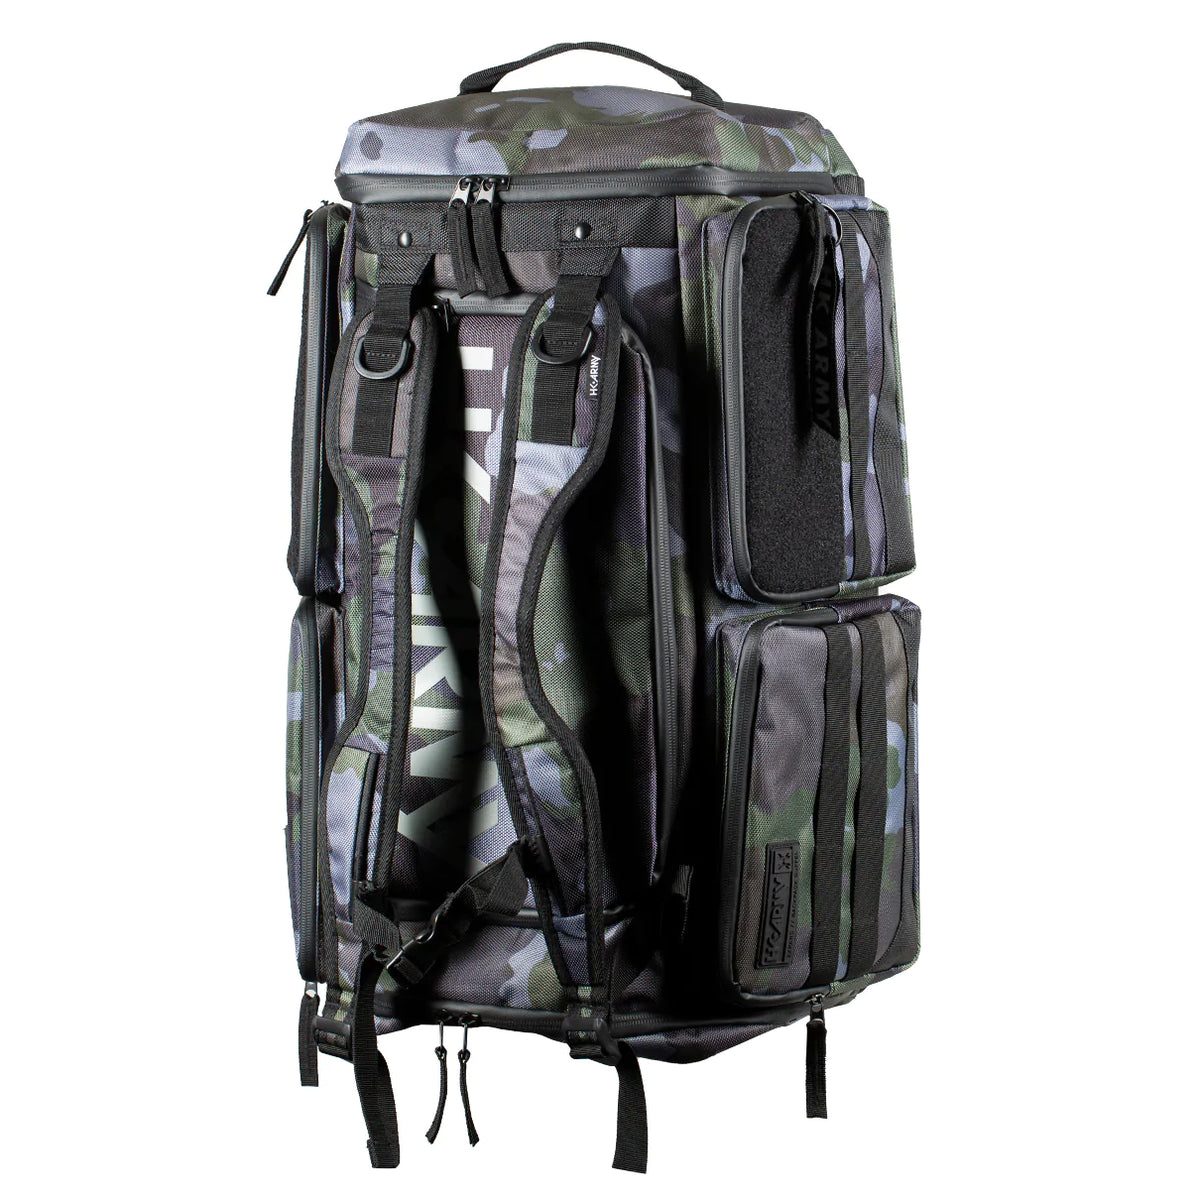 Expand 35L - Backpack - Shroud Forest | Paintball Gear Bag | Hk Army